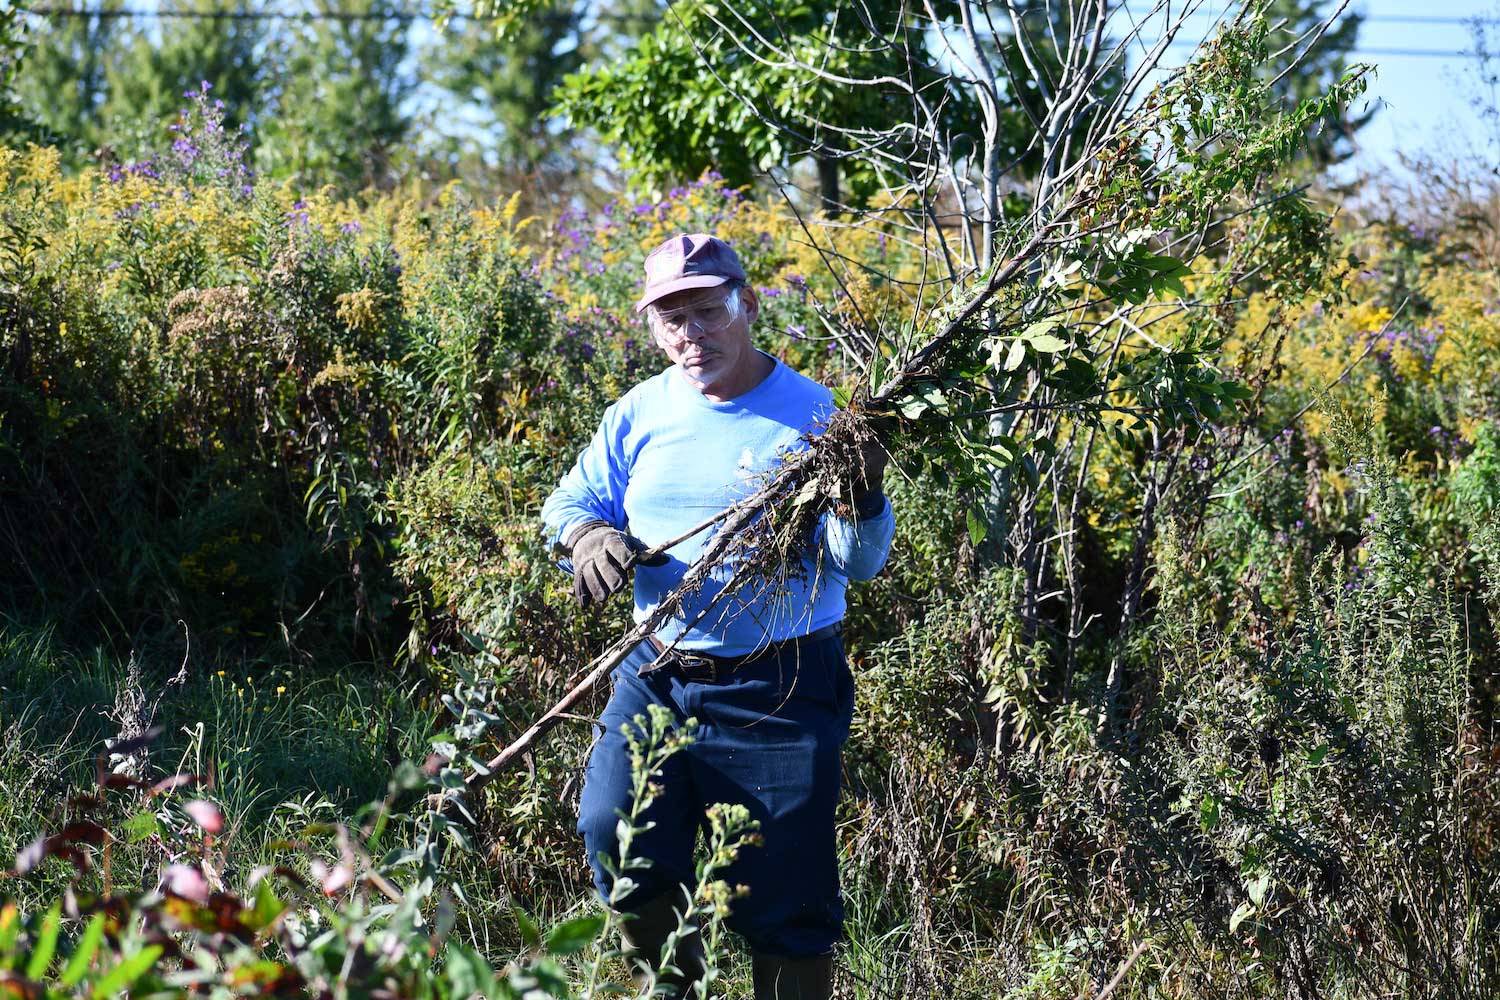 A man clearing brush from a field.